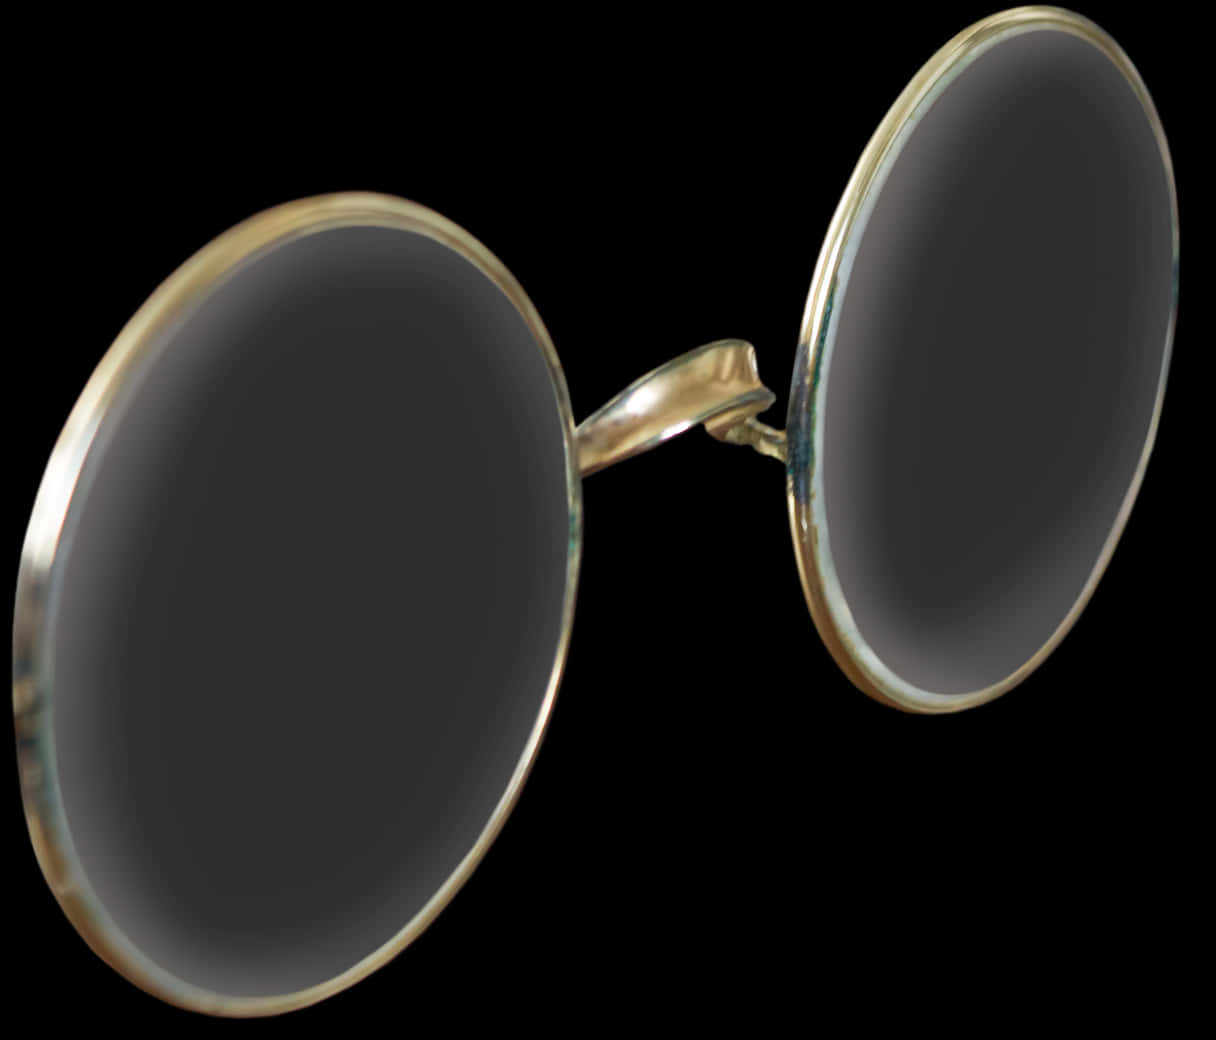 Vintage Round Glasses Isolated PNG